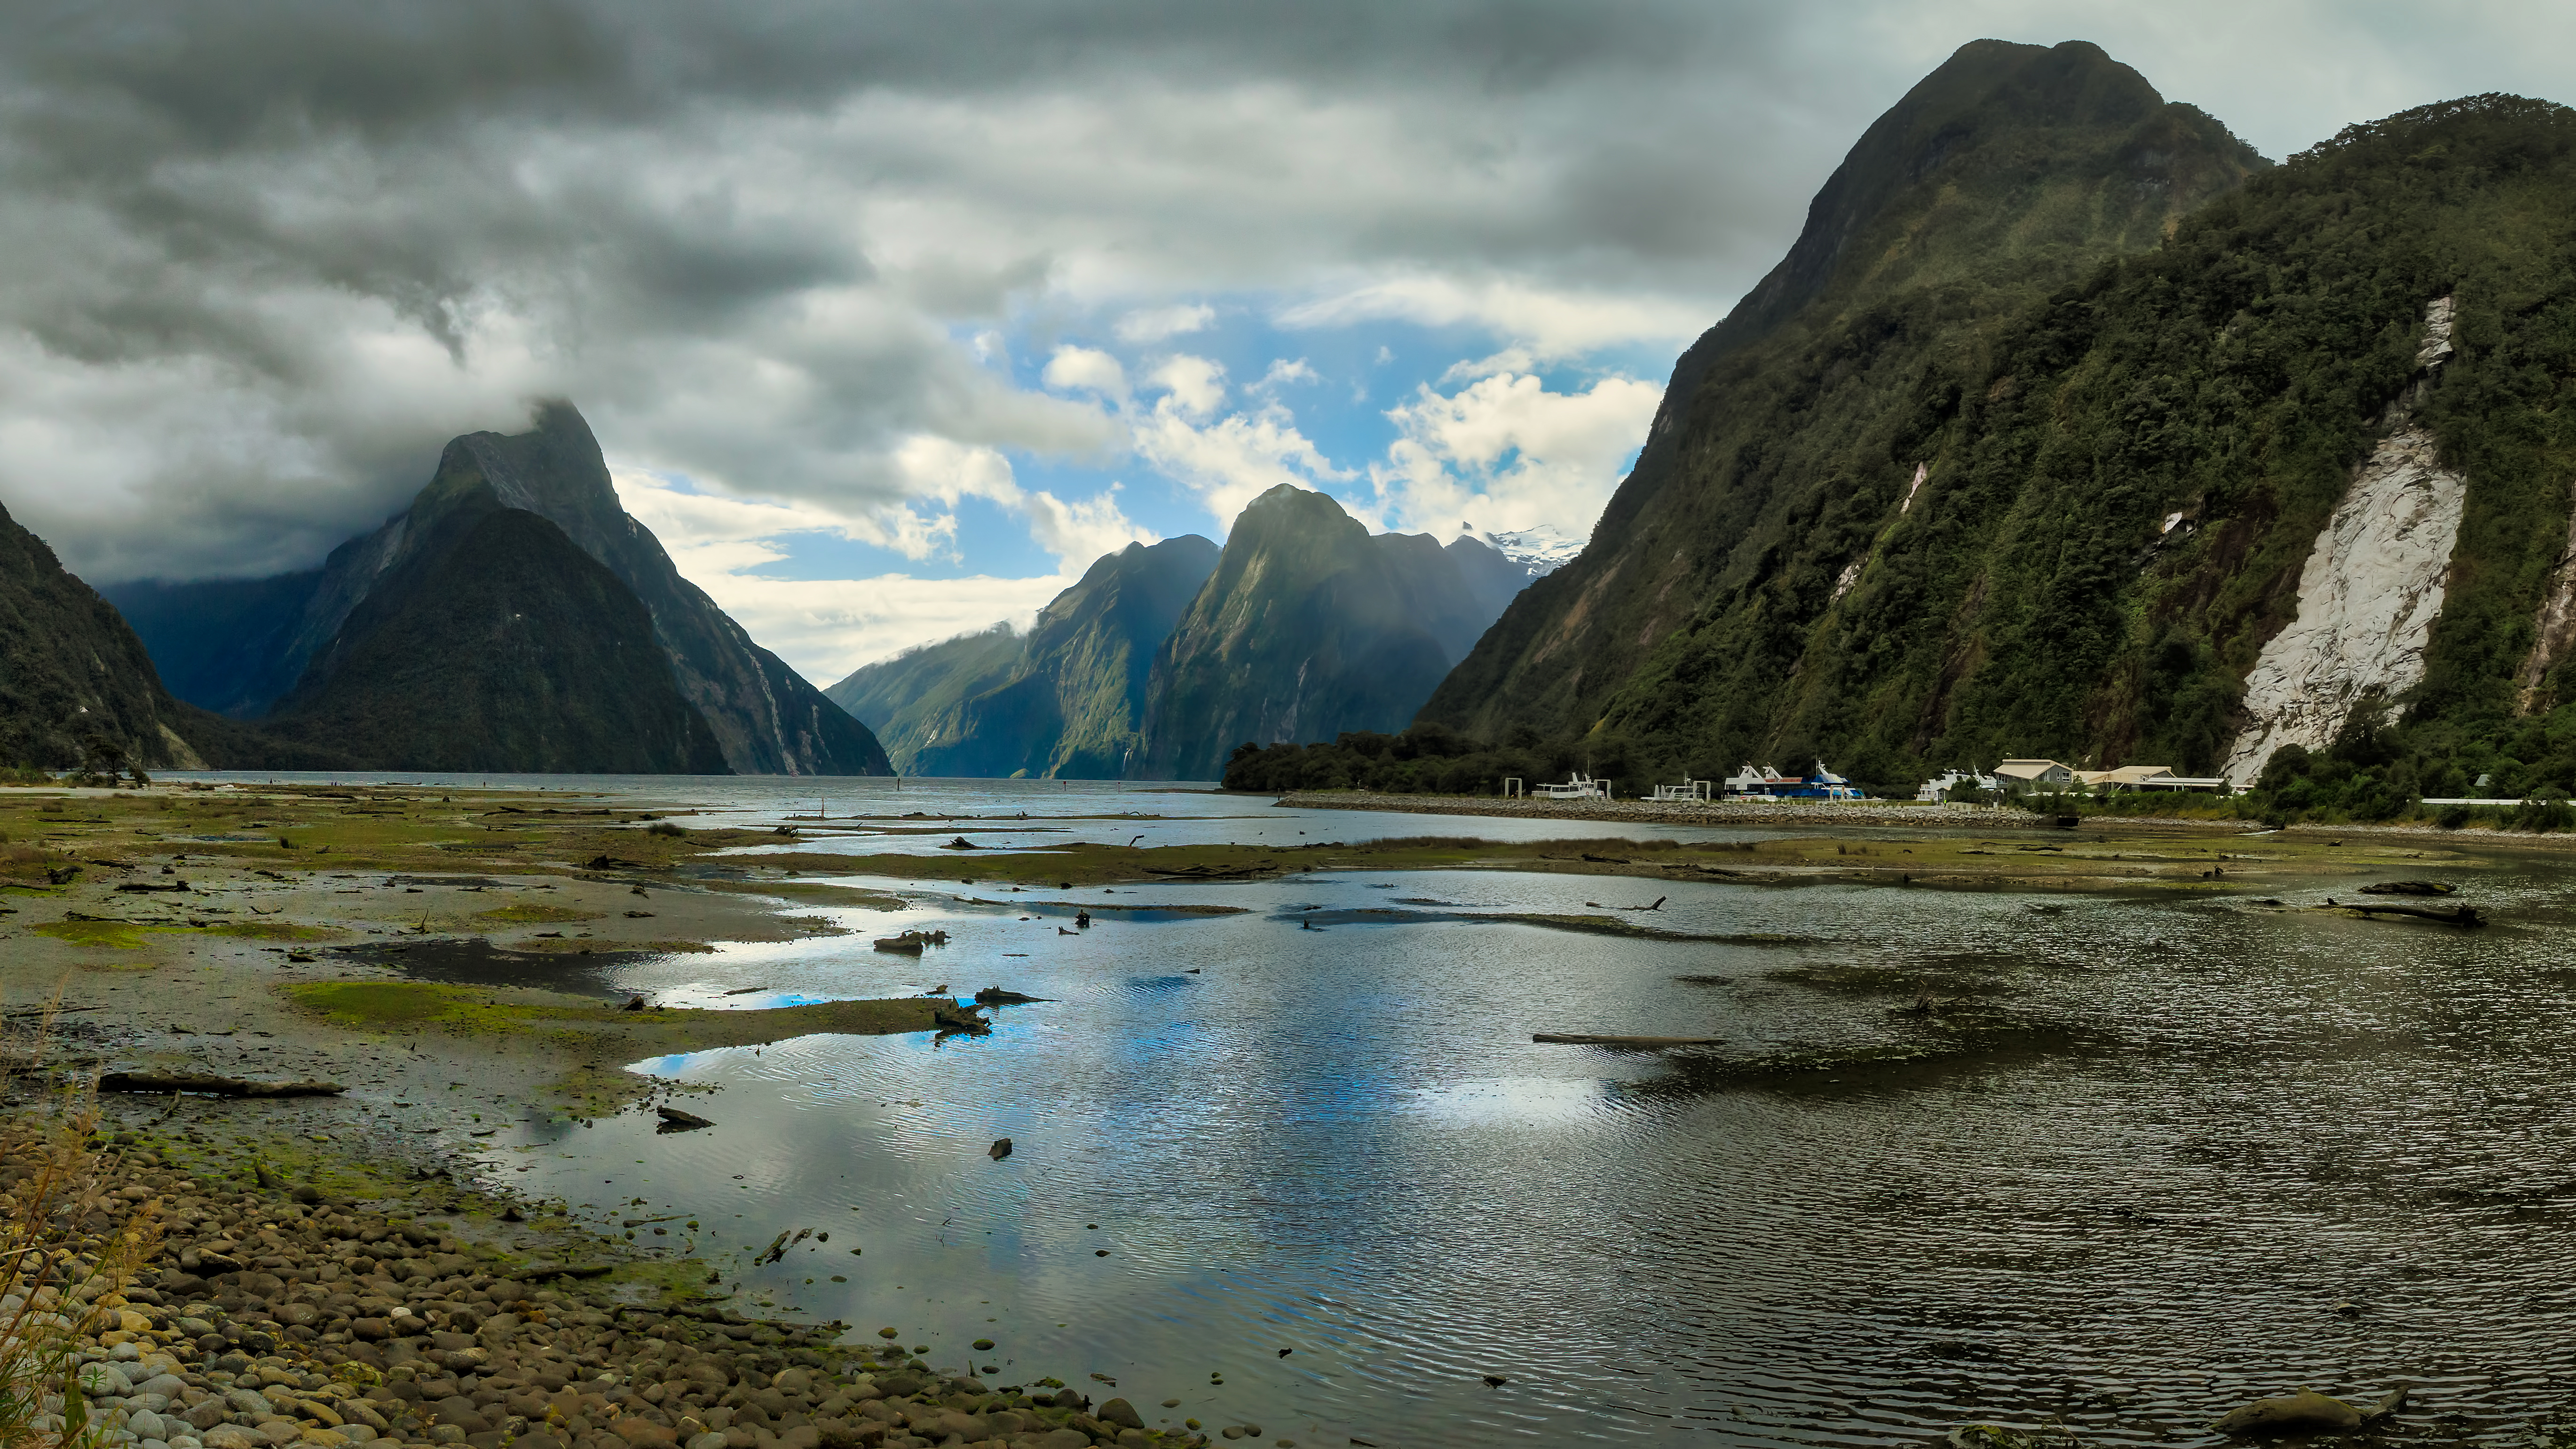 Milford sound on a stormy day. photo